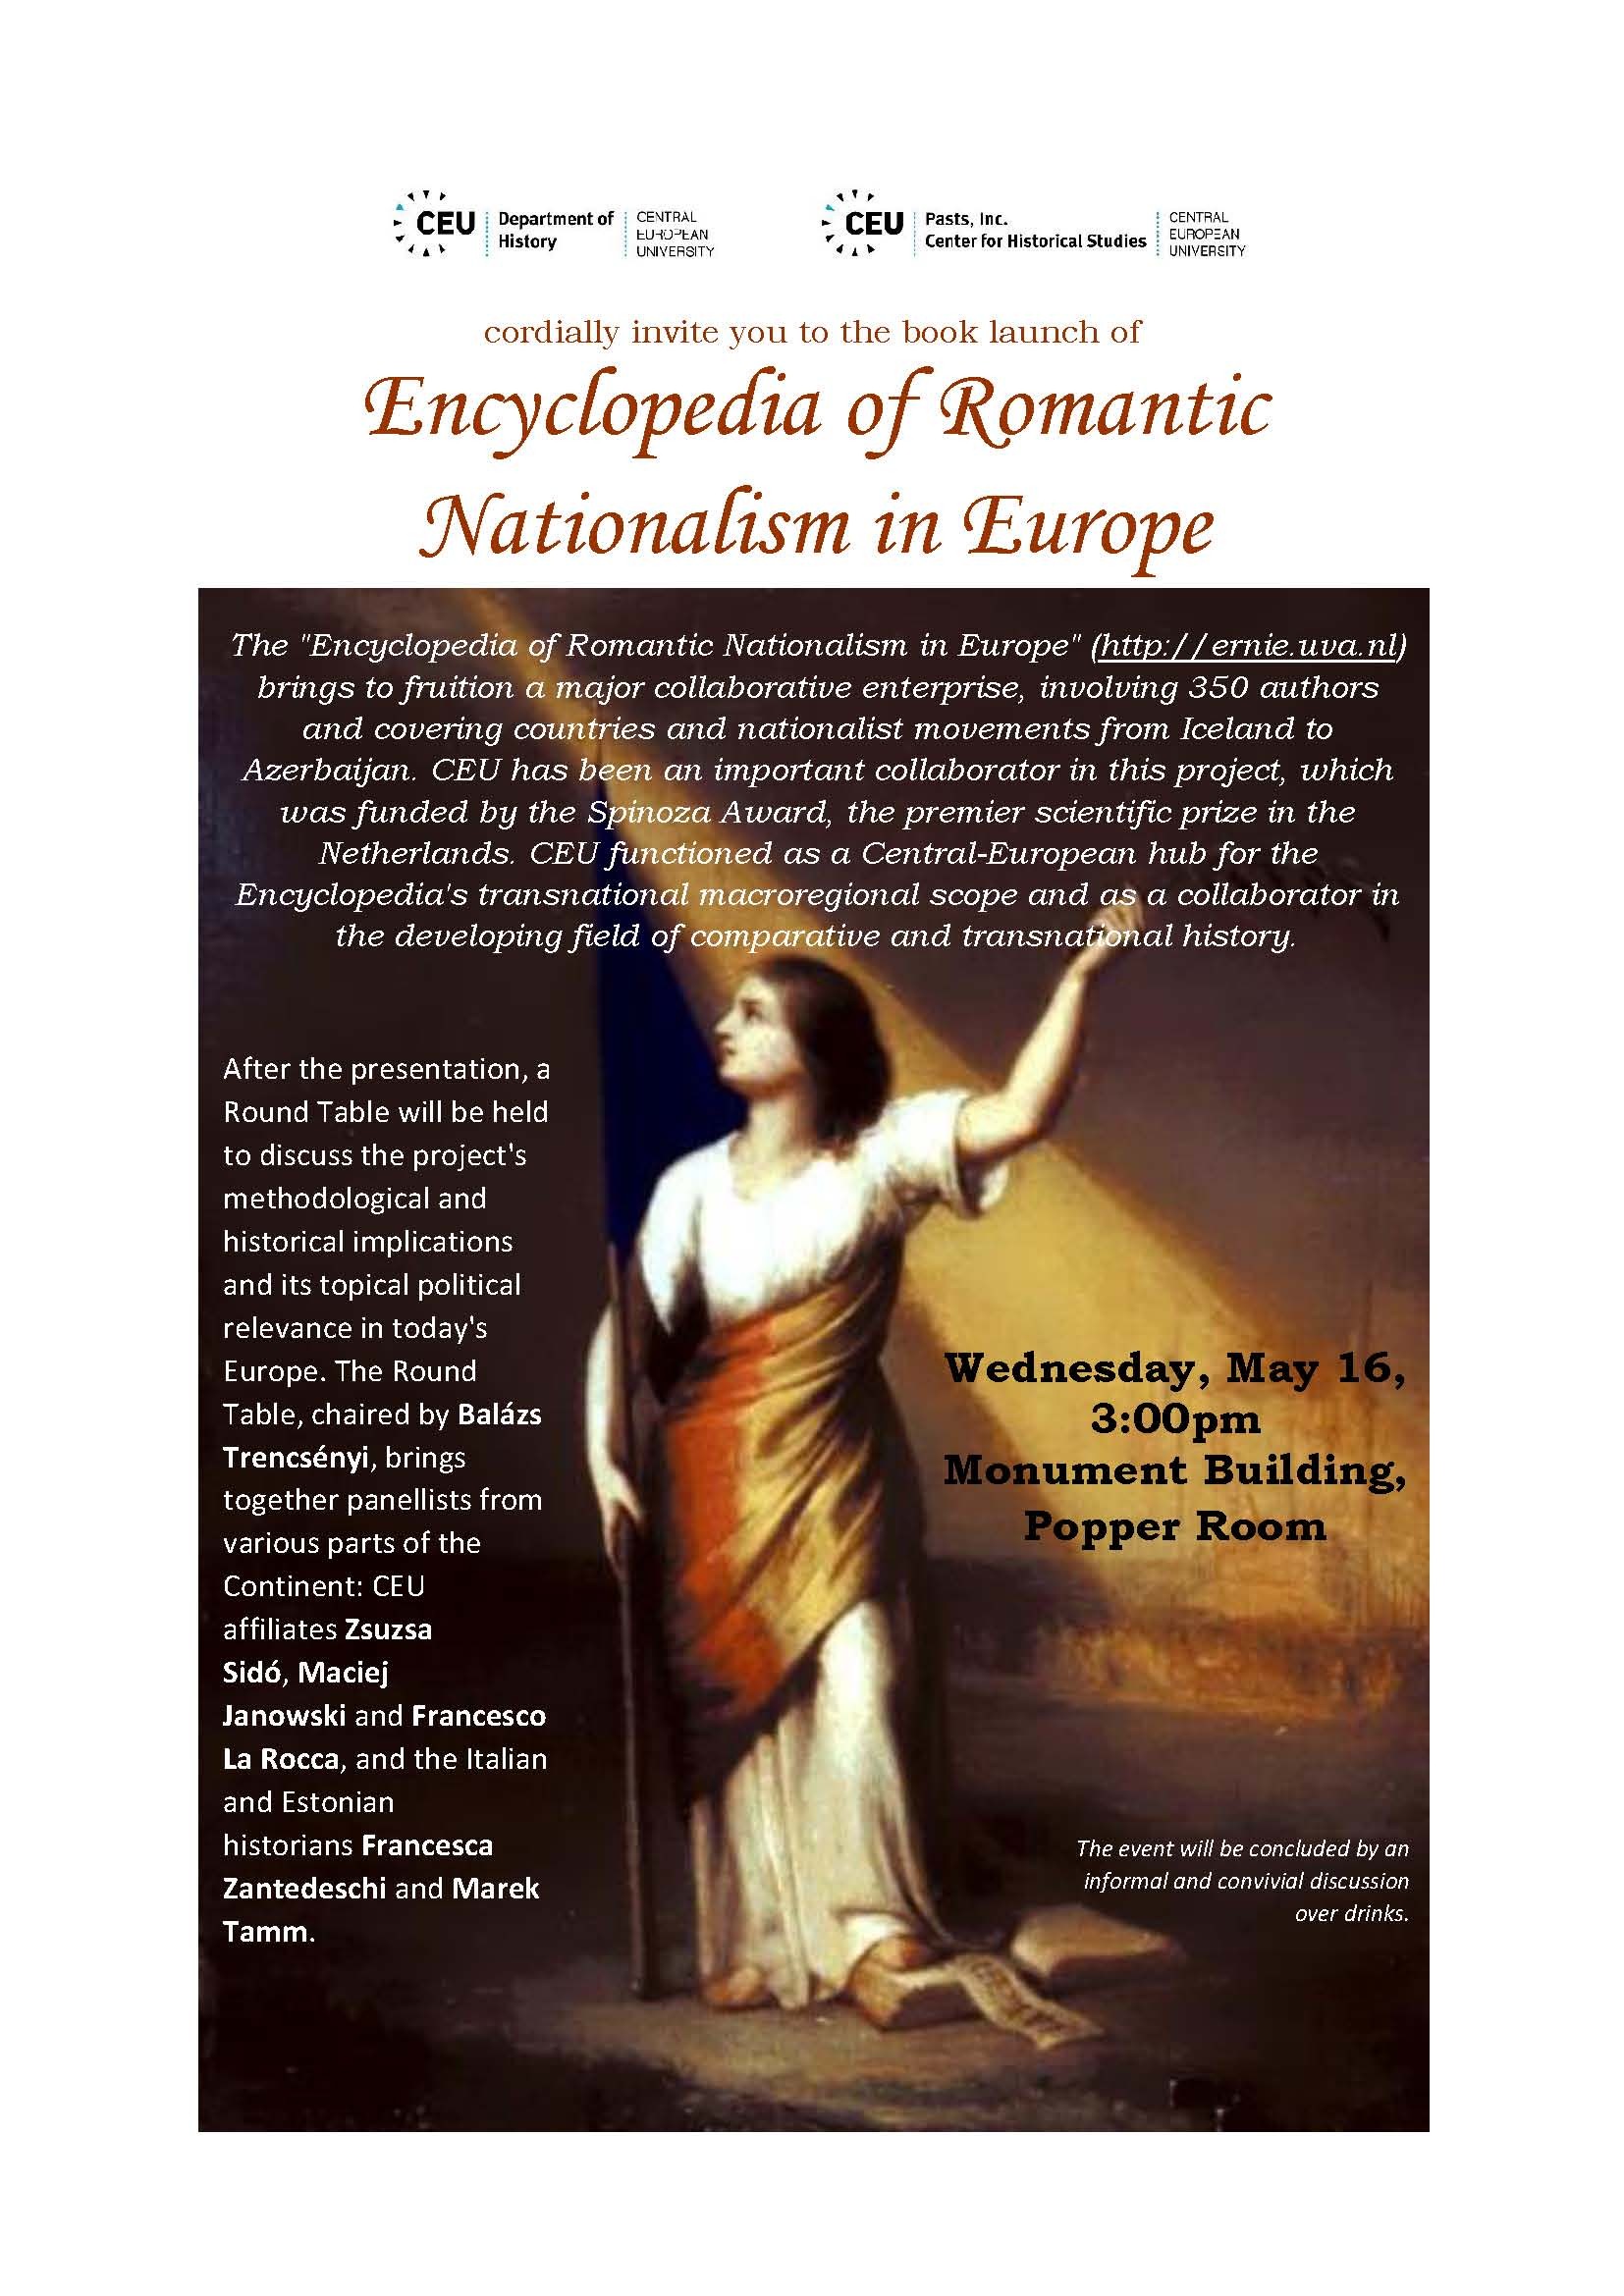 Romantic Nationalism booklaunch poster